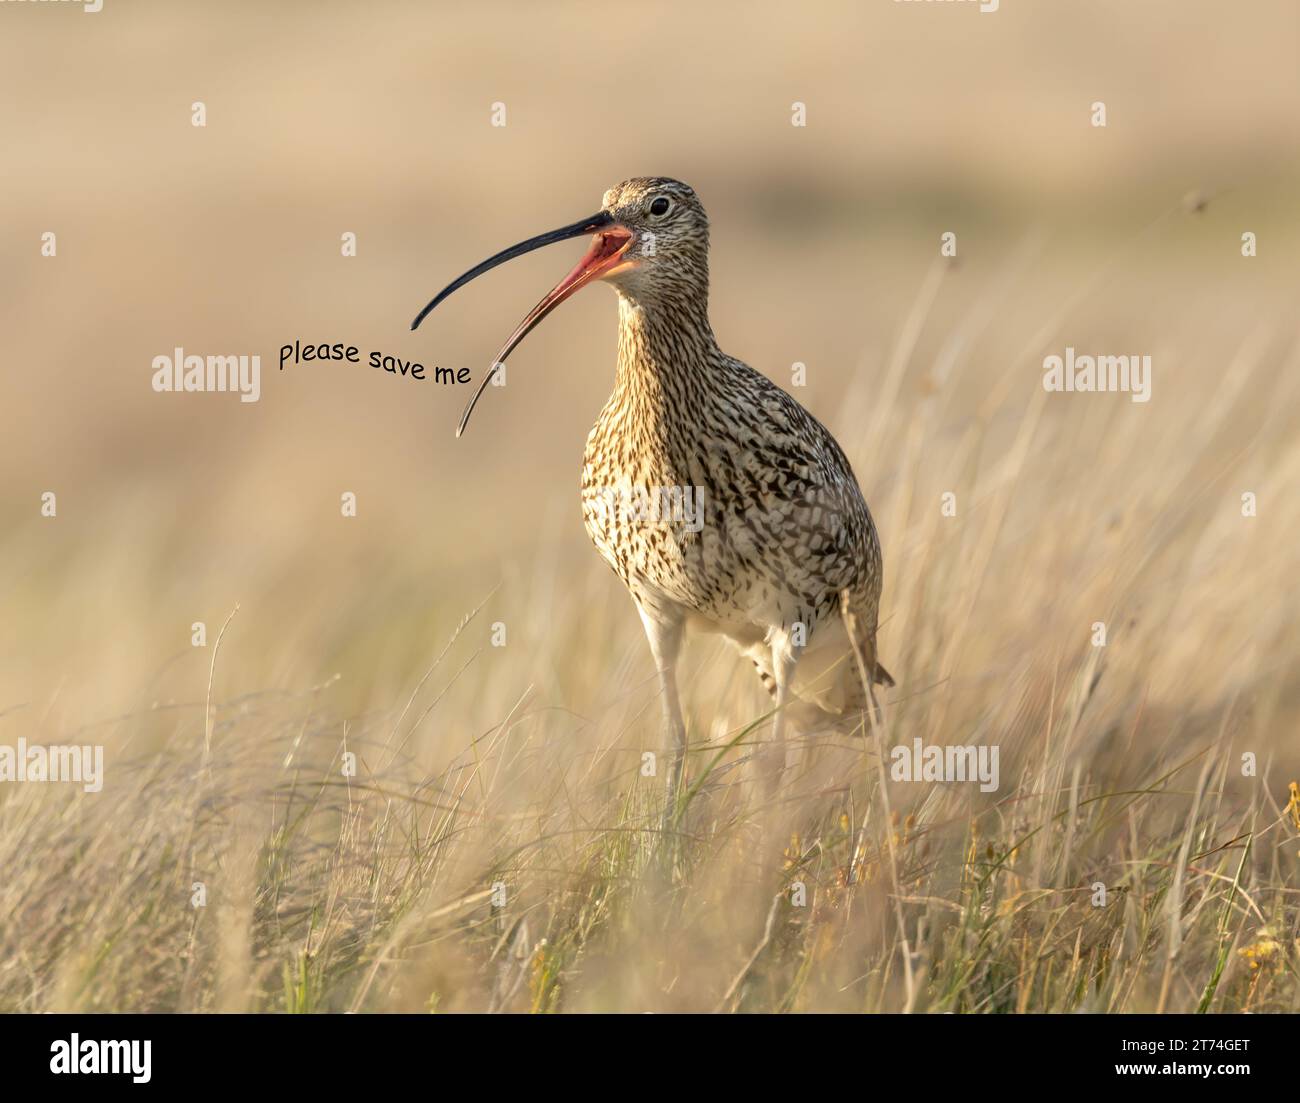 Curlew, Scientific name: Numenius arquata, Close up of a curlew, a declining wader now on the IUCN Red list, facing front with open beak and calling w Stock Photo